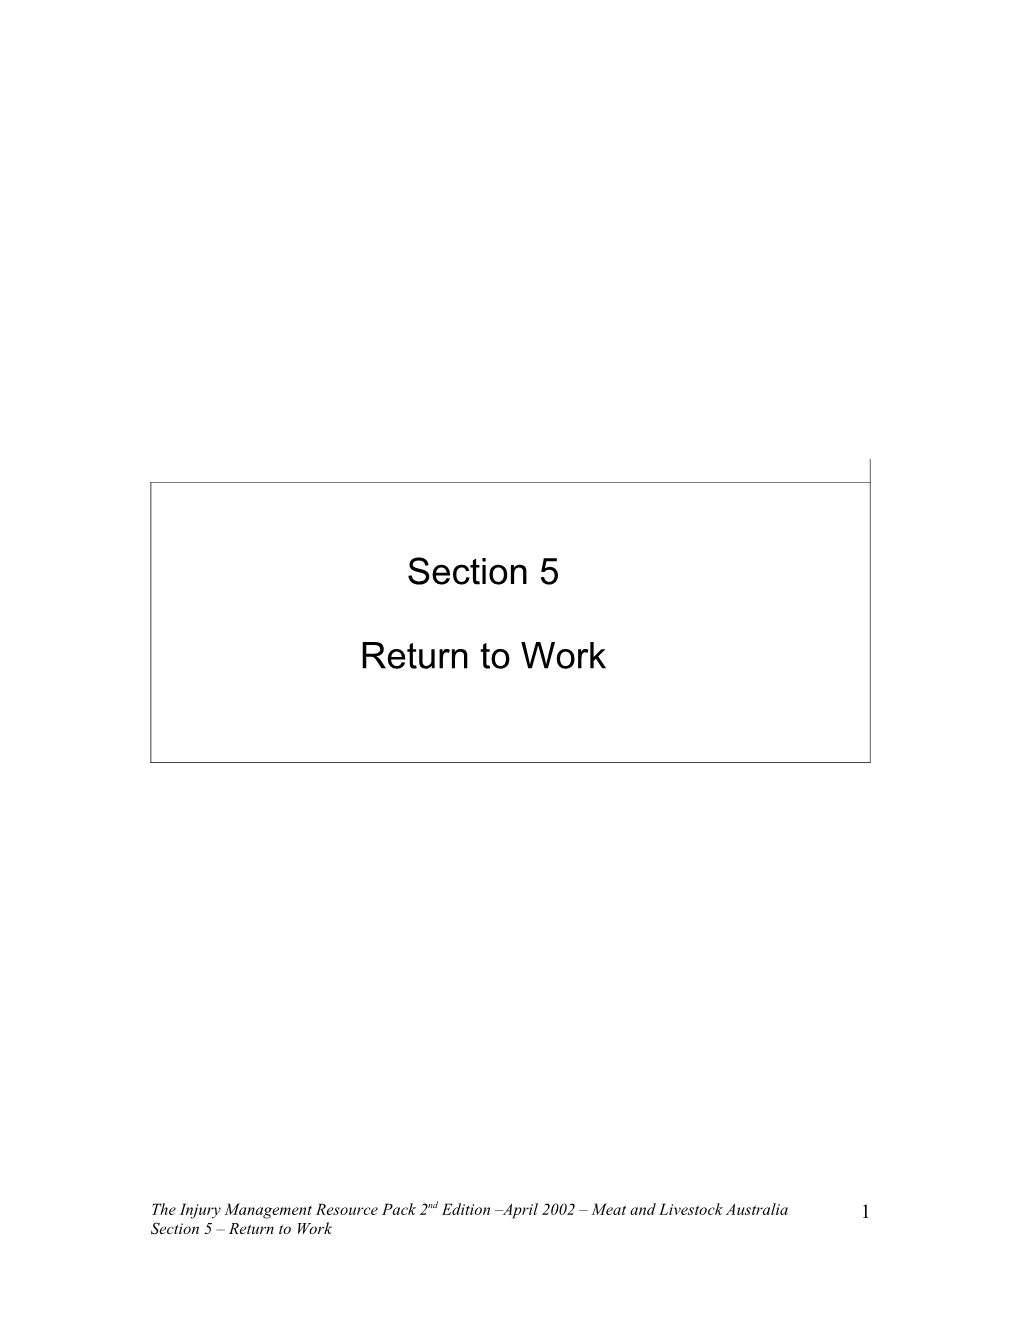 Section 4 Return to Work